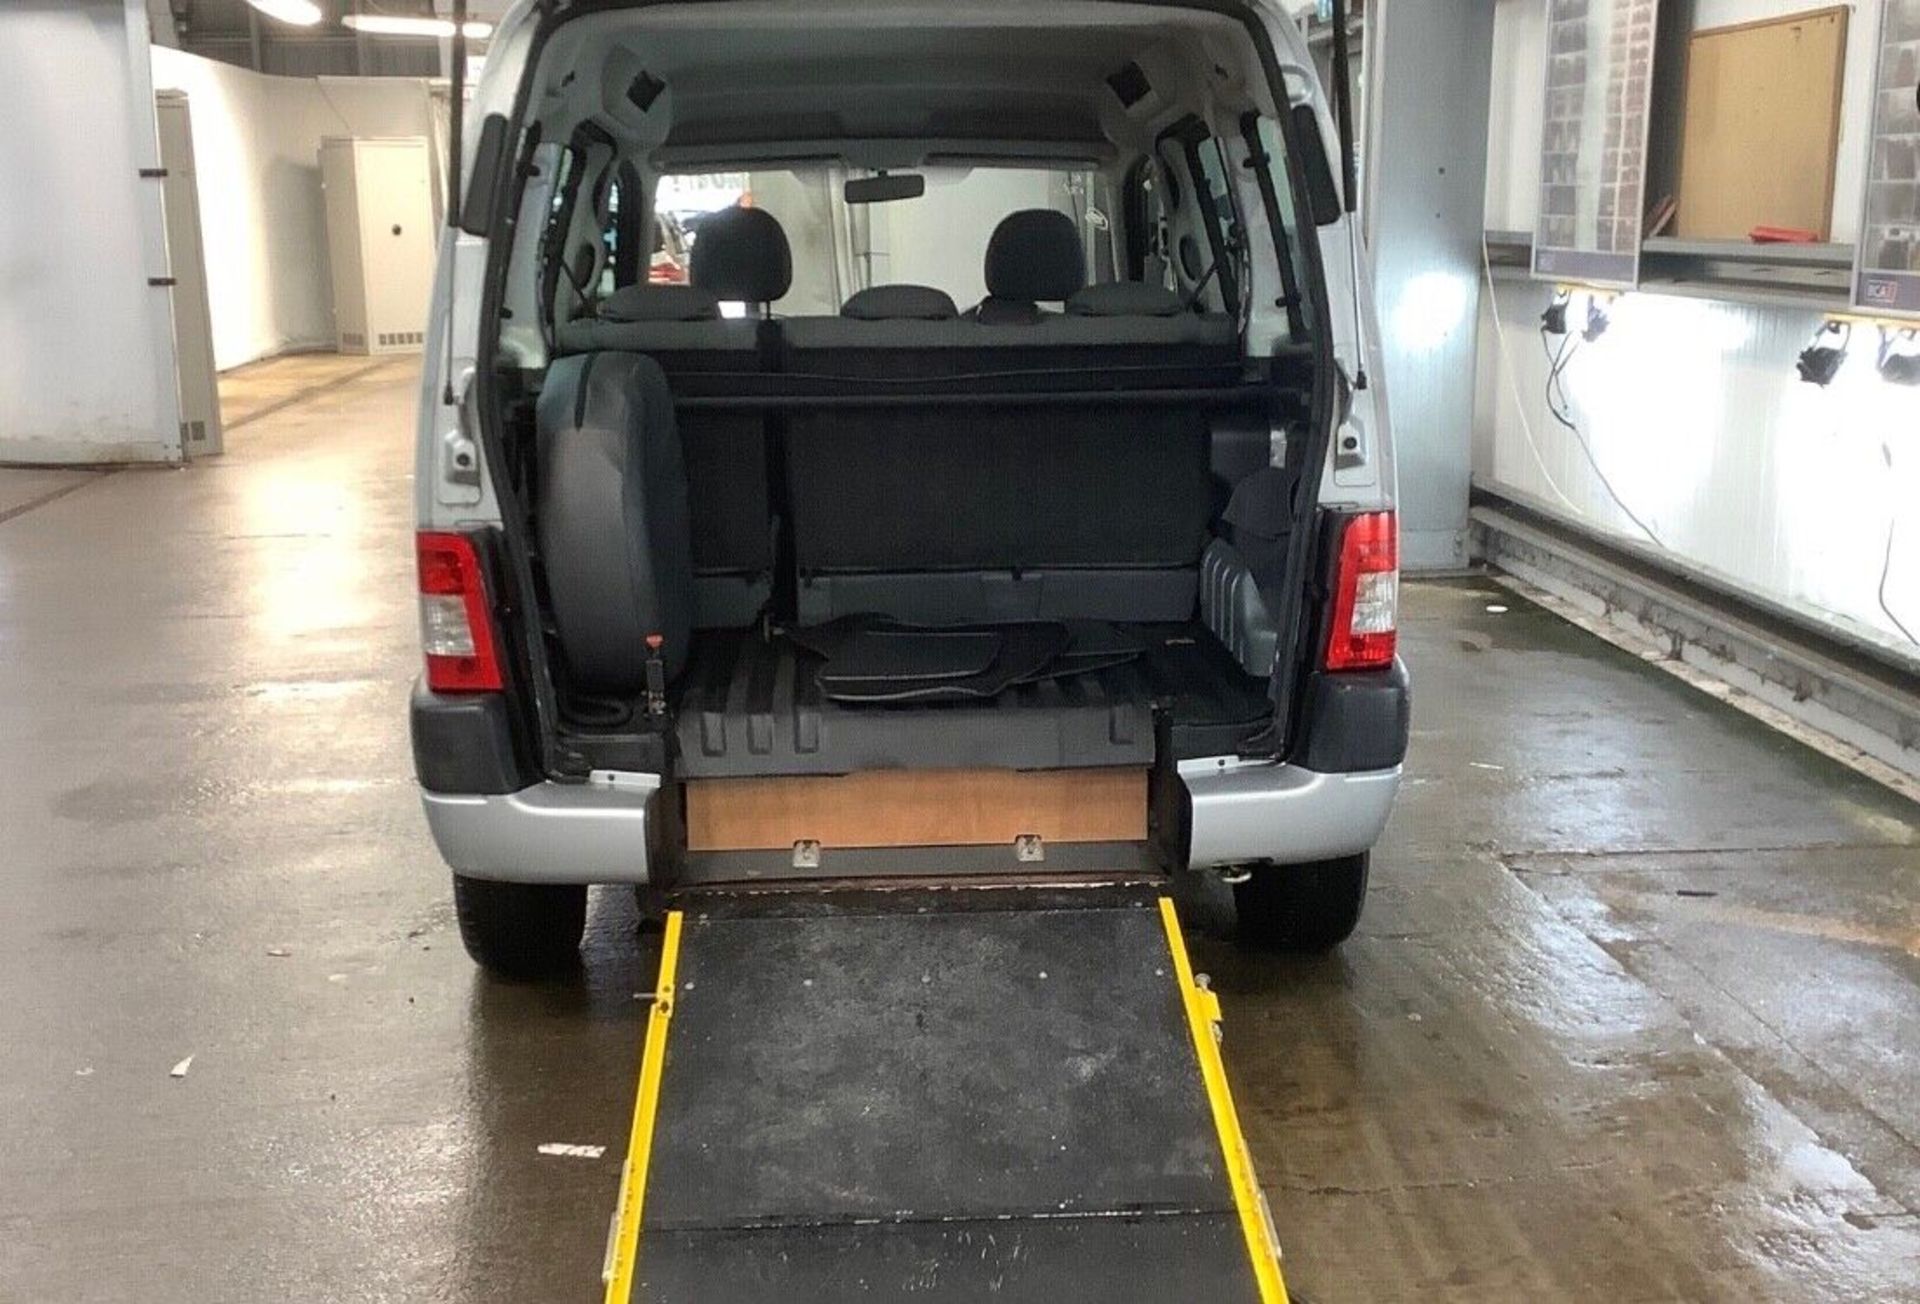 2008/57 PEUGEOT PARTNER COMBI 1.4 MANUAL WHEELCHAIR ACCESSIBLE VEHICLE - Image 7 of 7